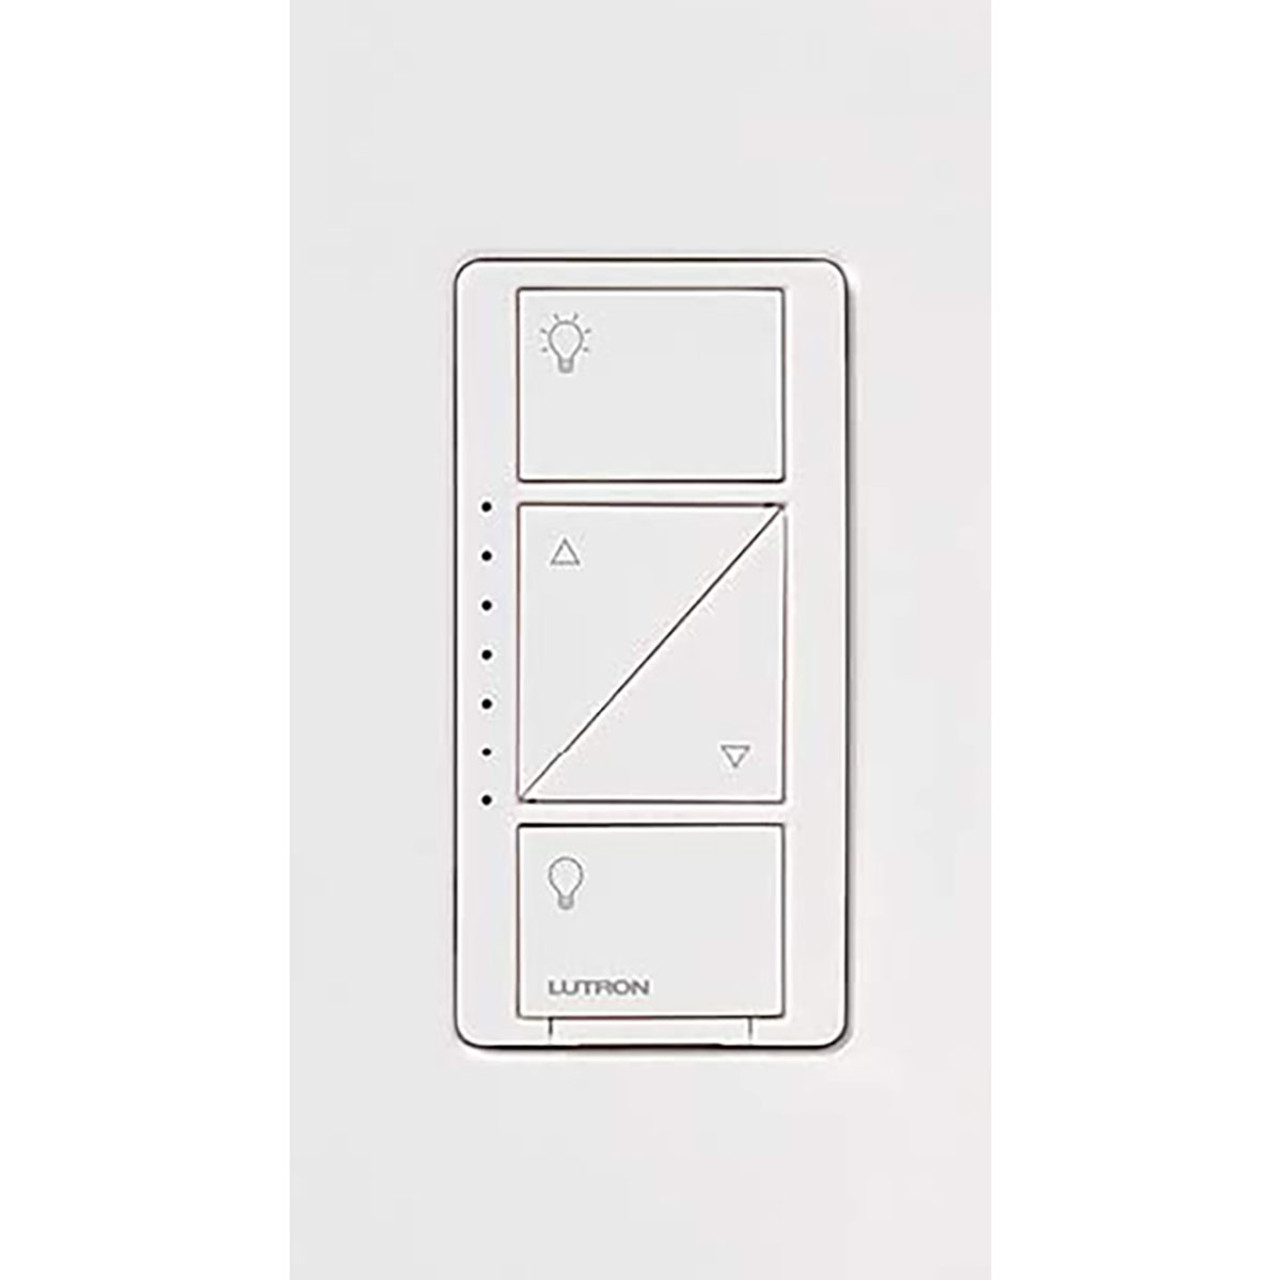 Lutron Caseta Smart Home Dimmer Switch for LED Bulbs  product image